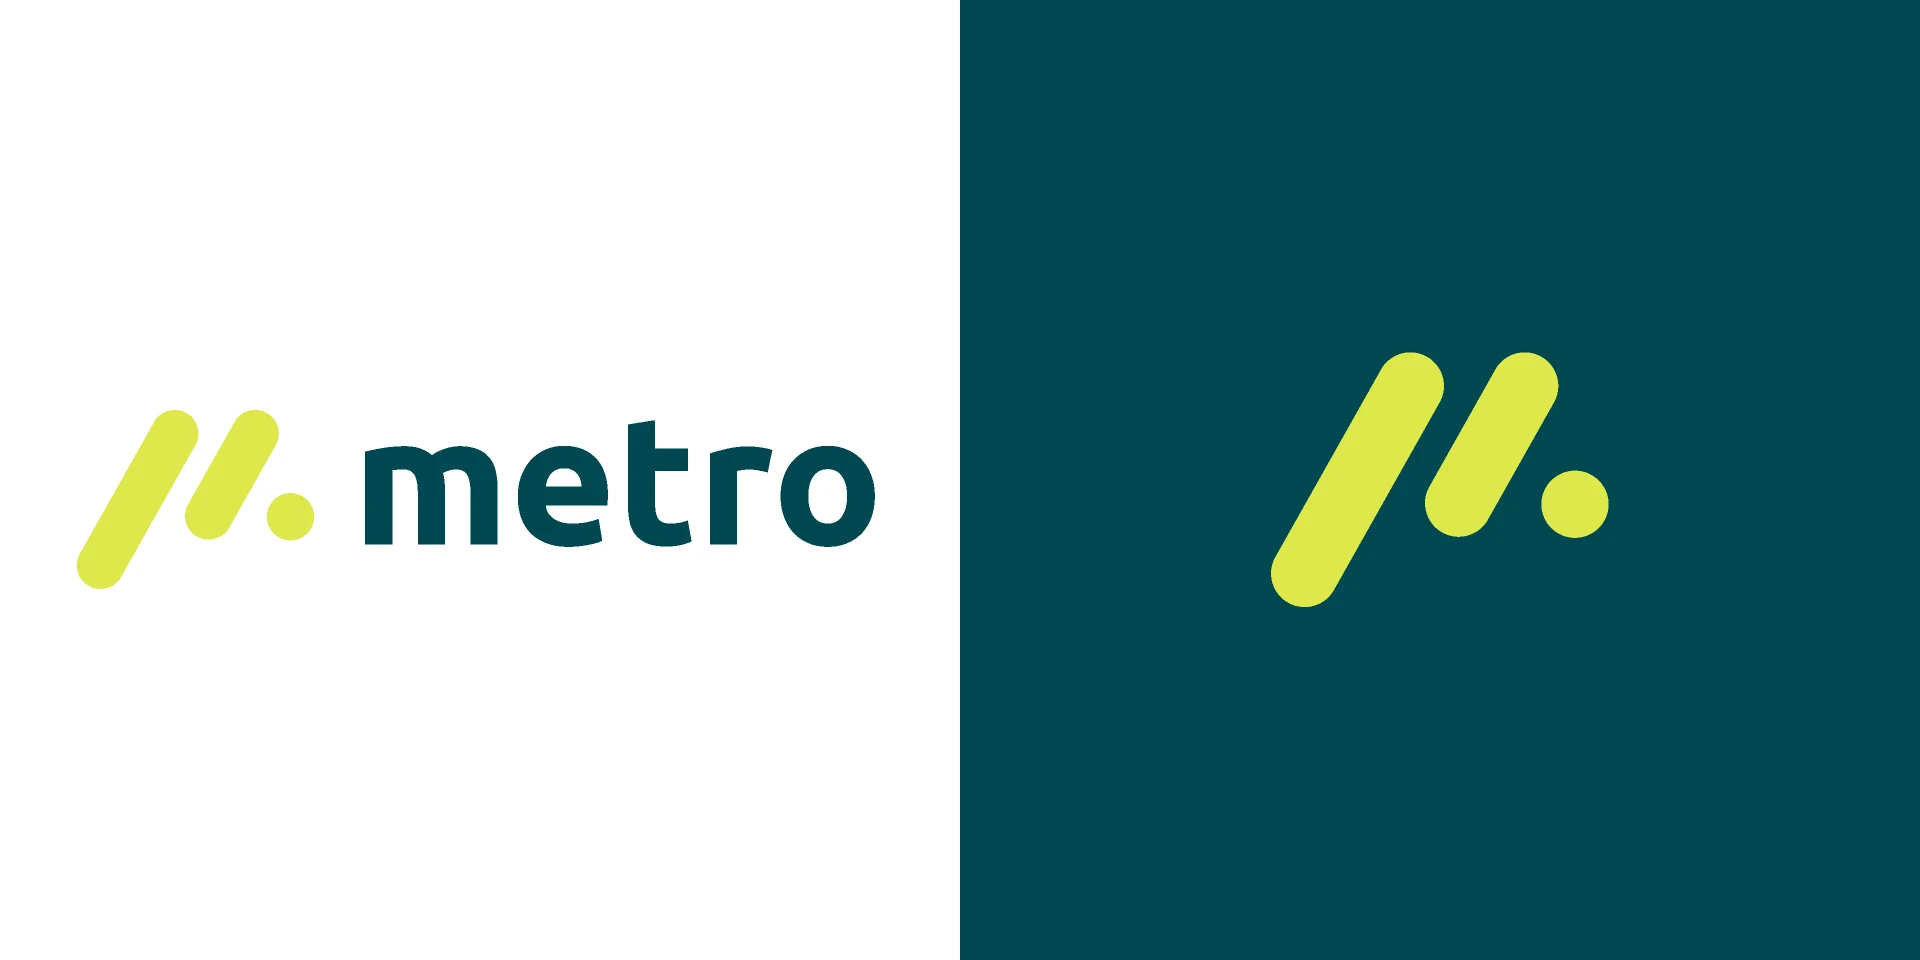 Metro Booking App Case Study for Figma and Adobe XD